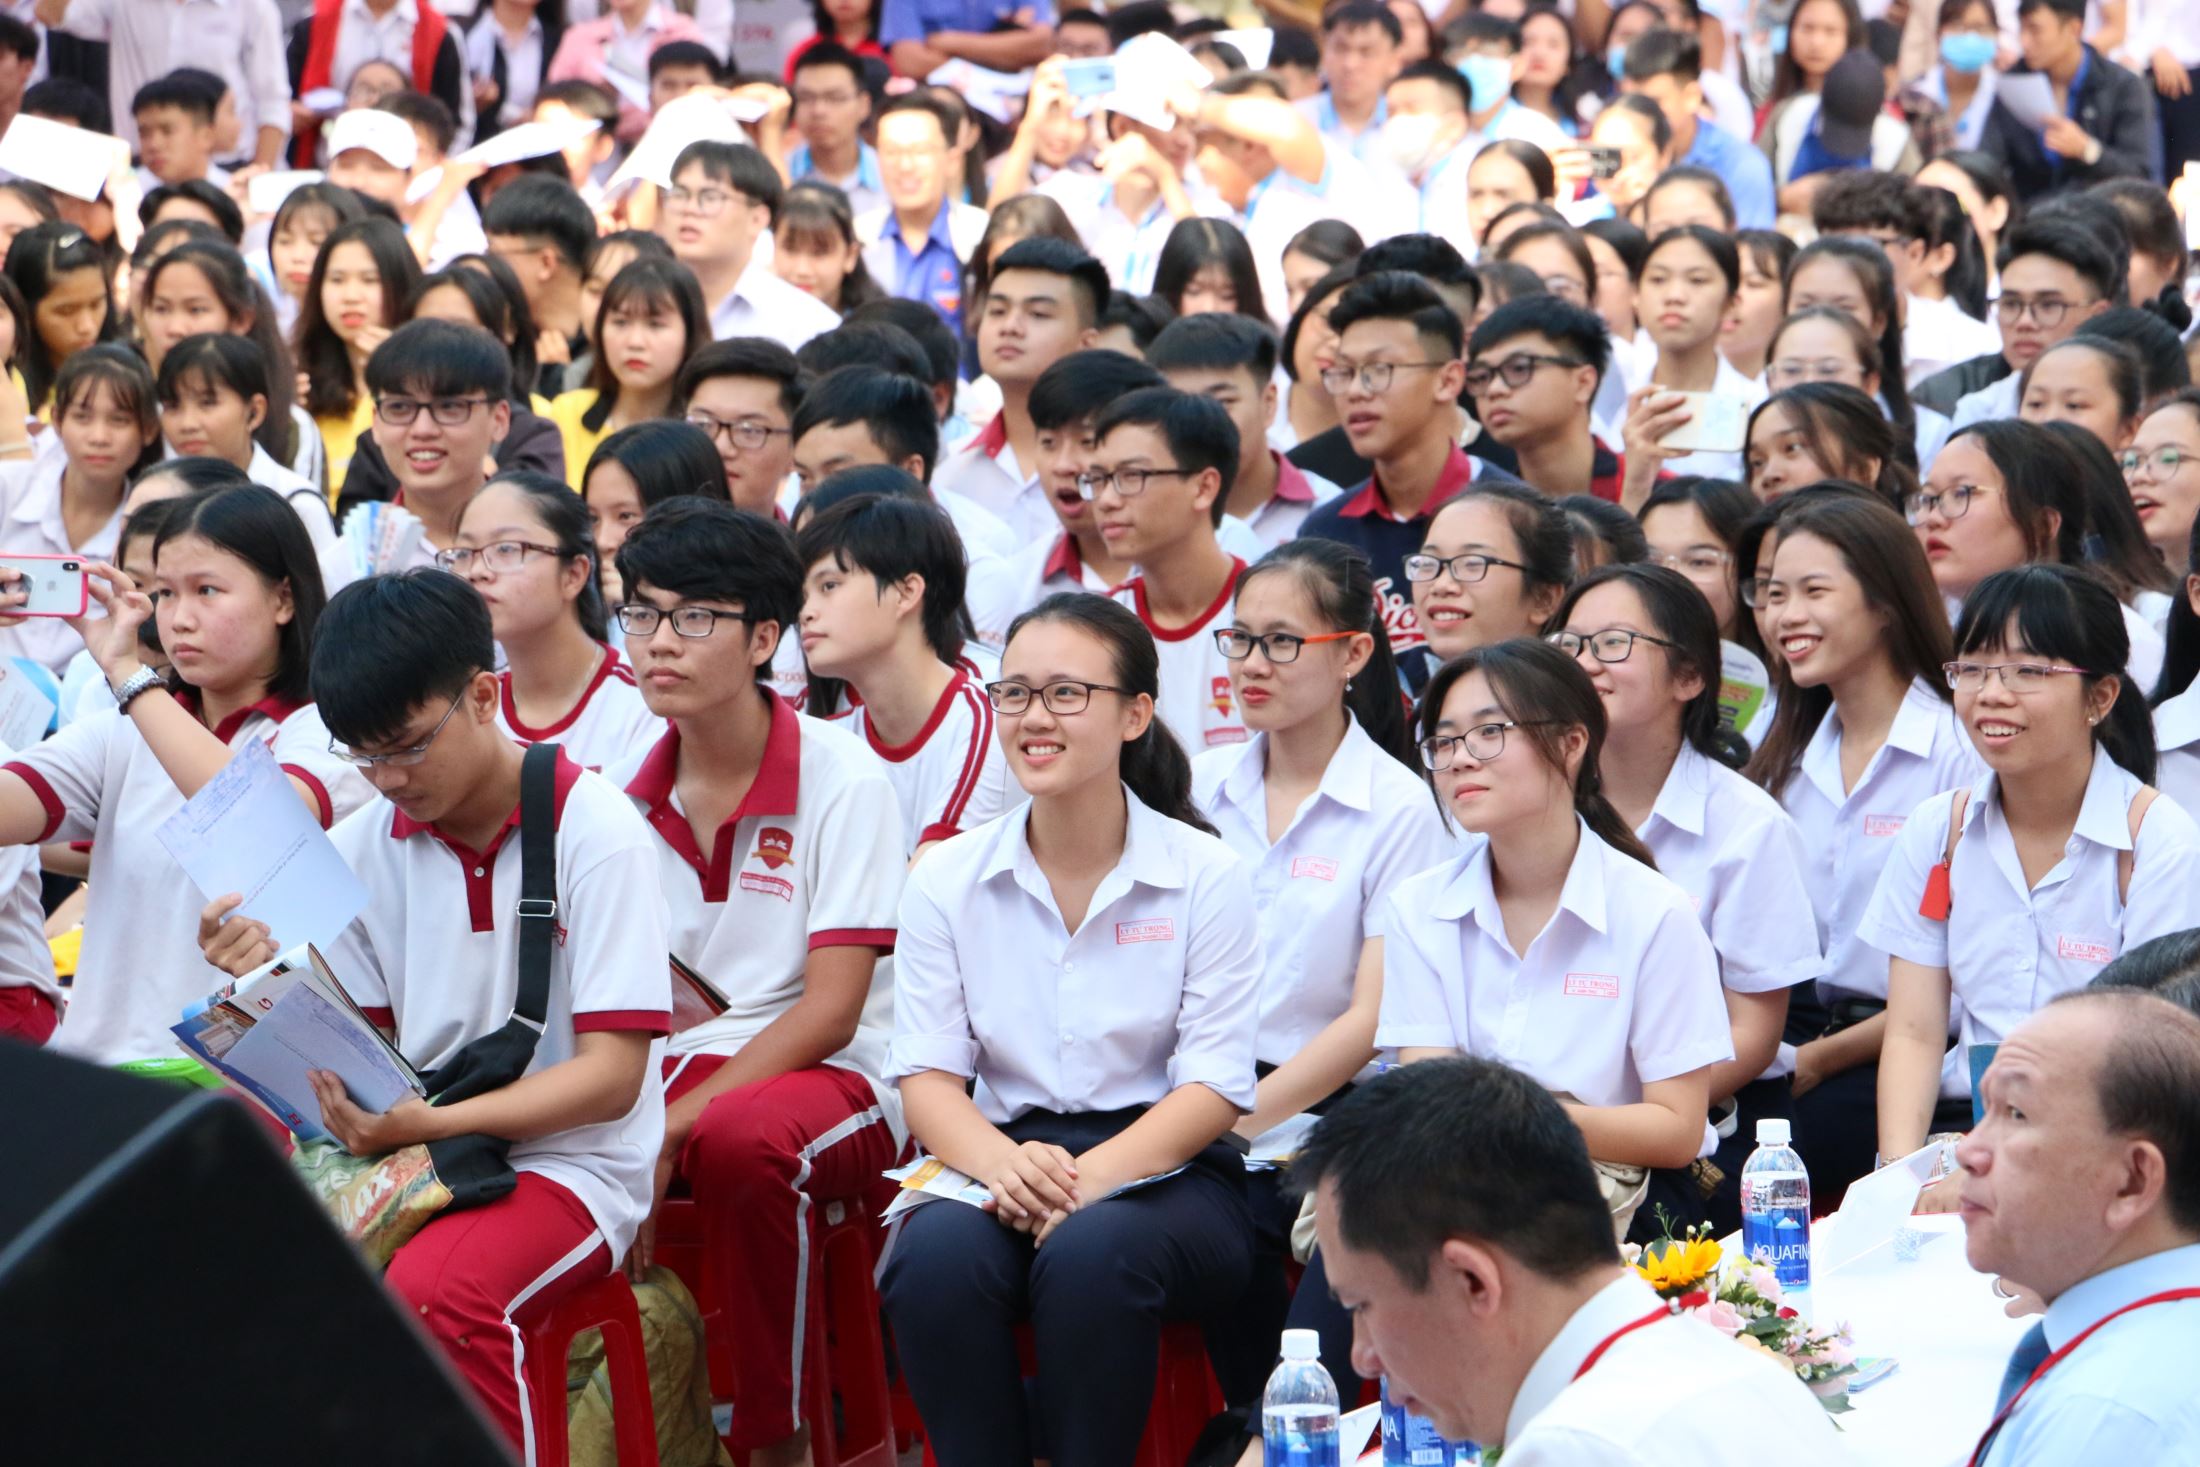 More than 4,000 high school students in Khanh Hoa province attended the 2019 admissions information day.